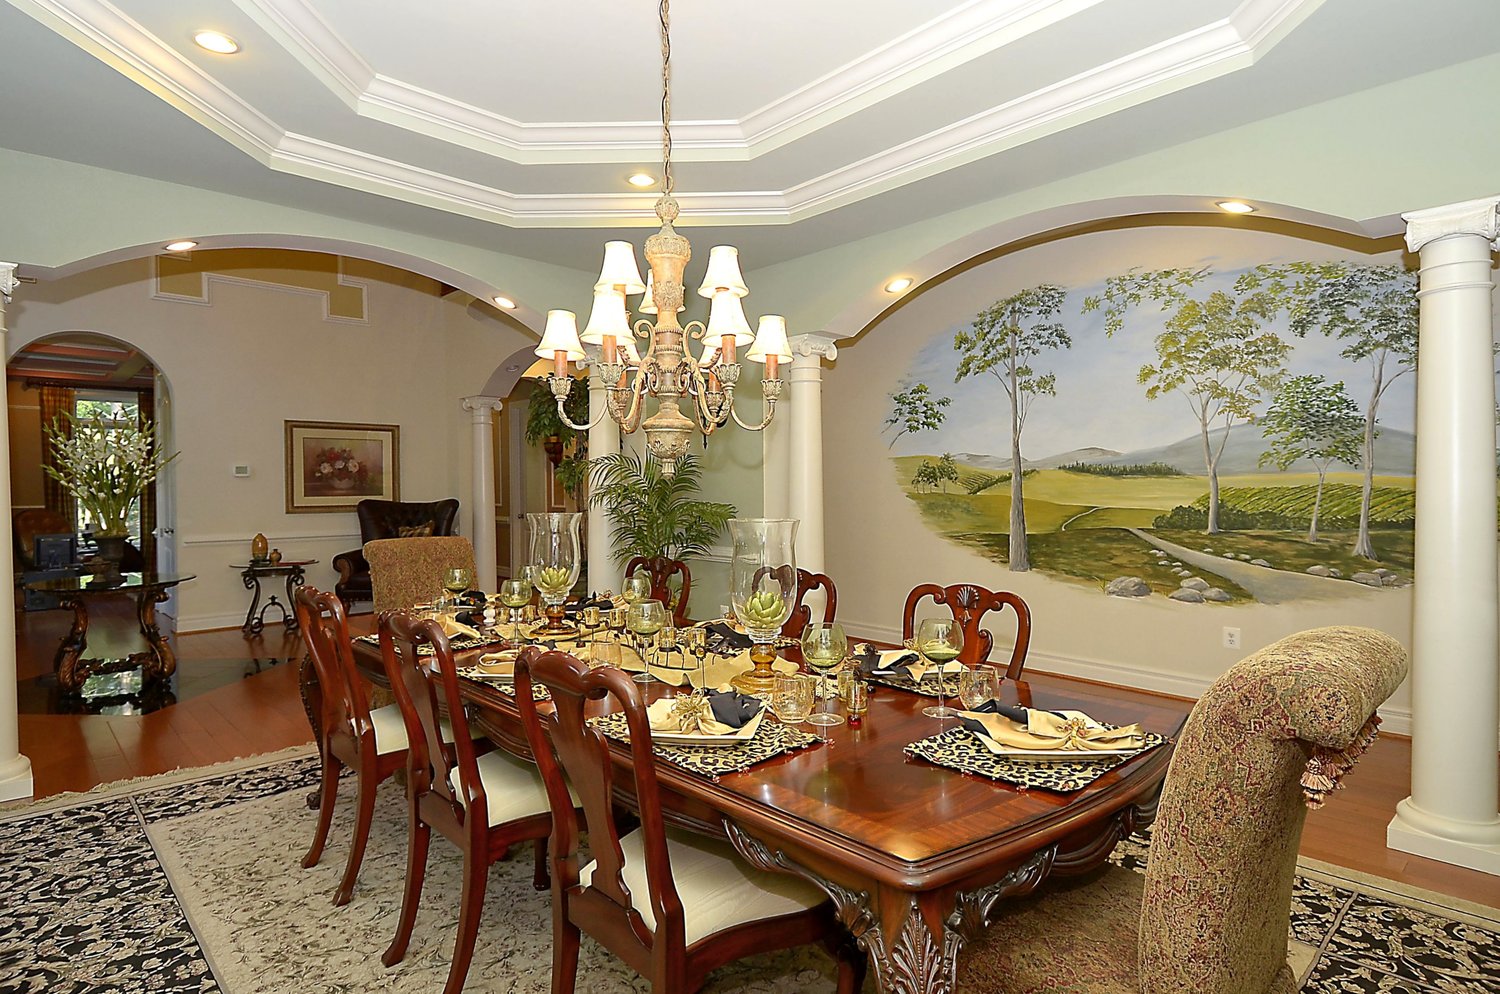 Gallery Photo of Dining Area